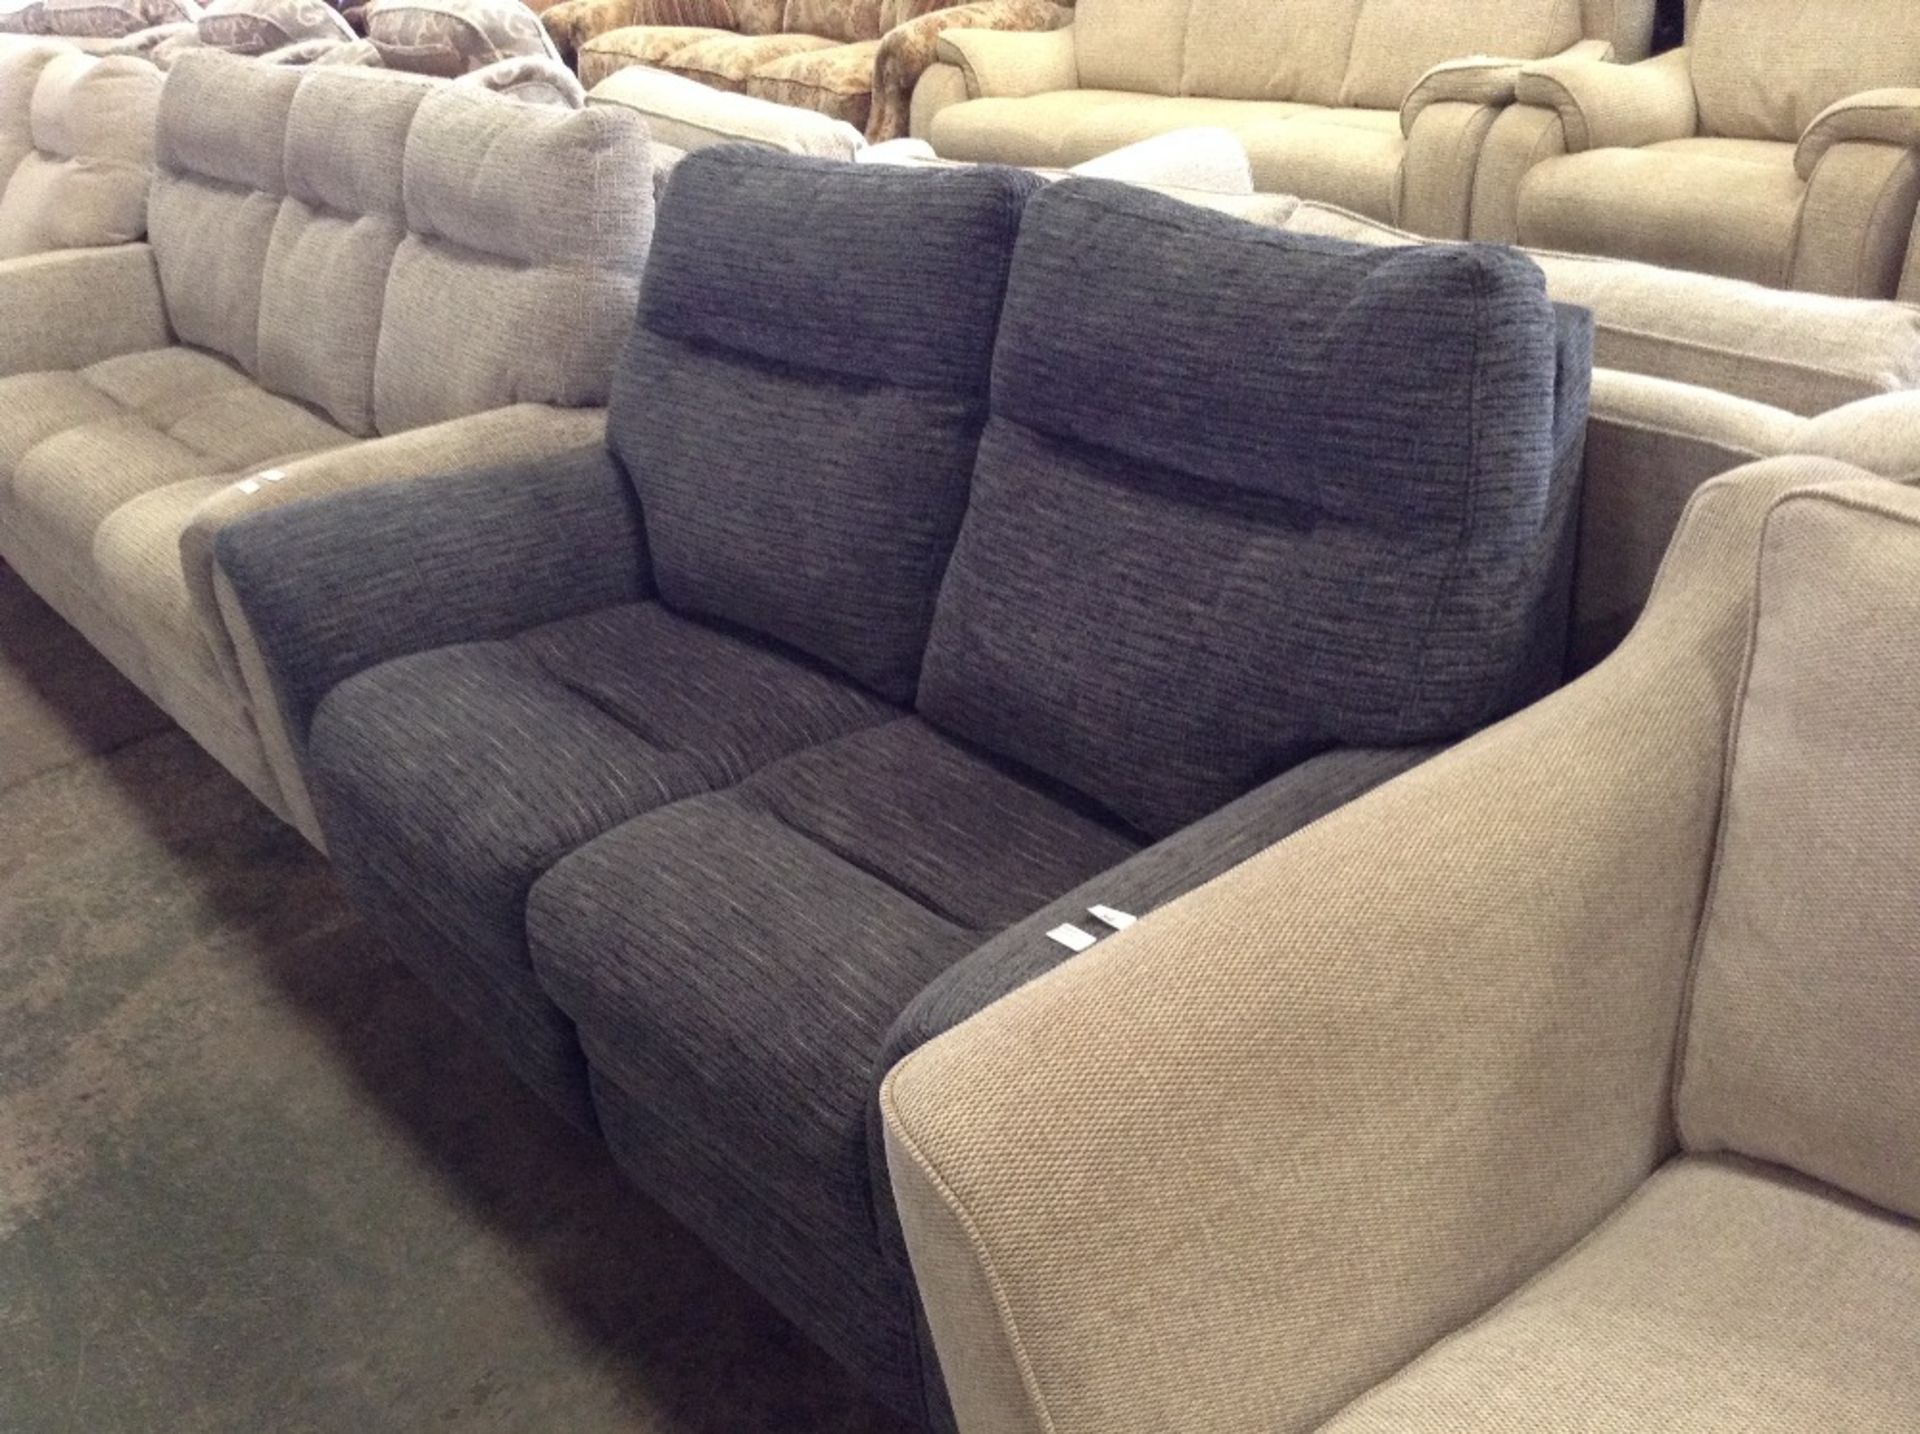 GREY PATTERNED MANUAL RECLINING 2 SEATER SOFA (TR0